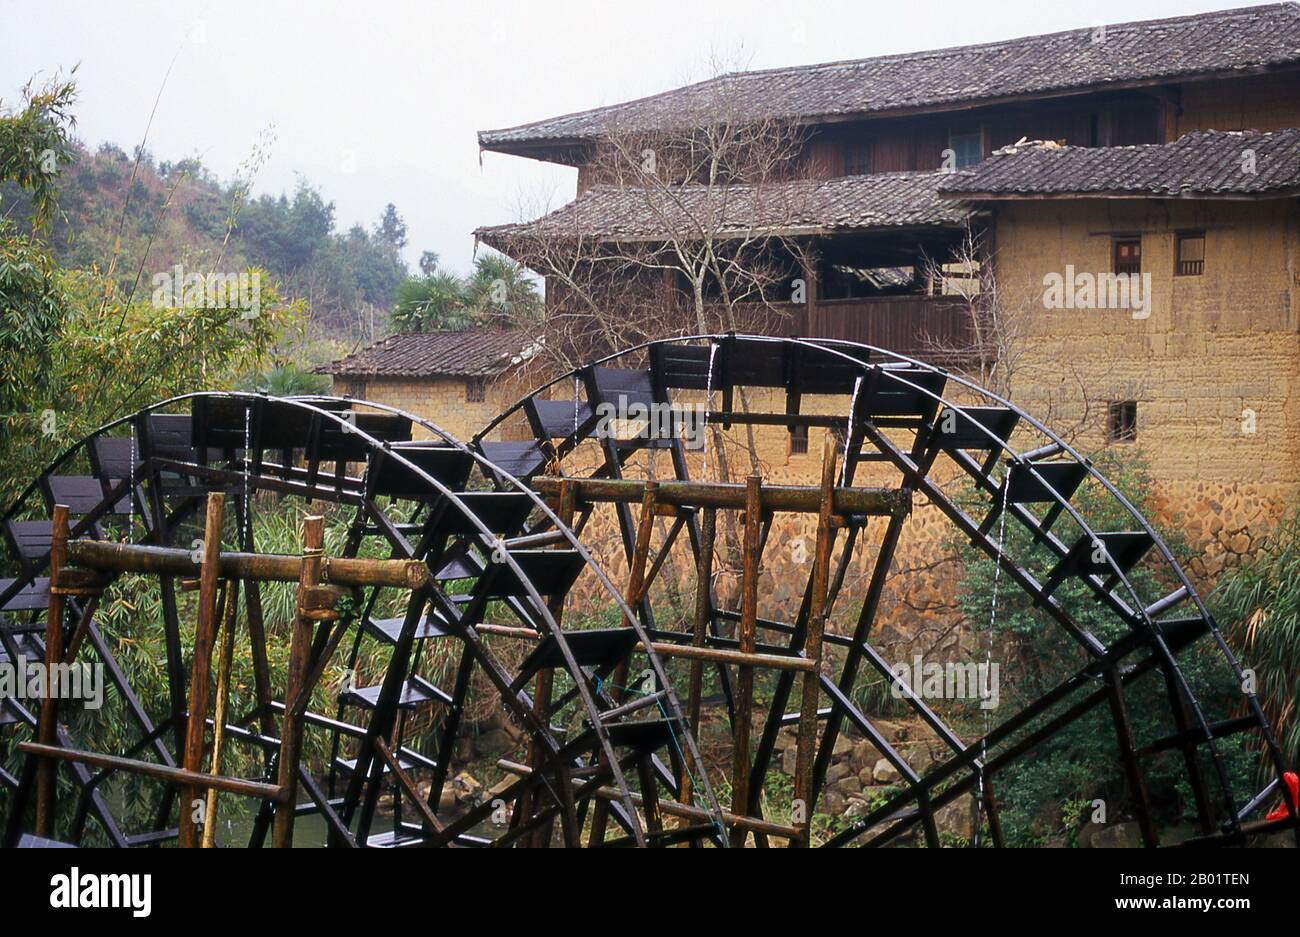 China: Waterwheels serving the Hakka earth houses near Hukeng, Yongding County, Fujian Province.  The Hakka (Kejia in Mandarin; literally 'guest people') are Han Chinese who speak the Hakka language. Their distinctive earthen houses or tulou can be found in the borderland counties where Guangdong, Jiangxi and Fujian provinces meet.  Communal entities, tulou are fortified against marauding bandits and generally made of compacted earth, bamboo, wood and stone. They contain many rooms on several storeys, so that several families can live together. Stock Photo